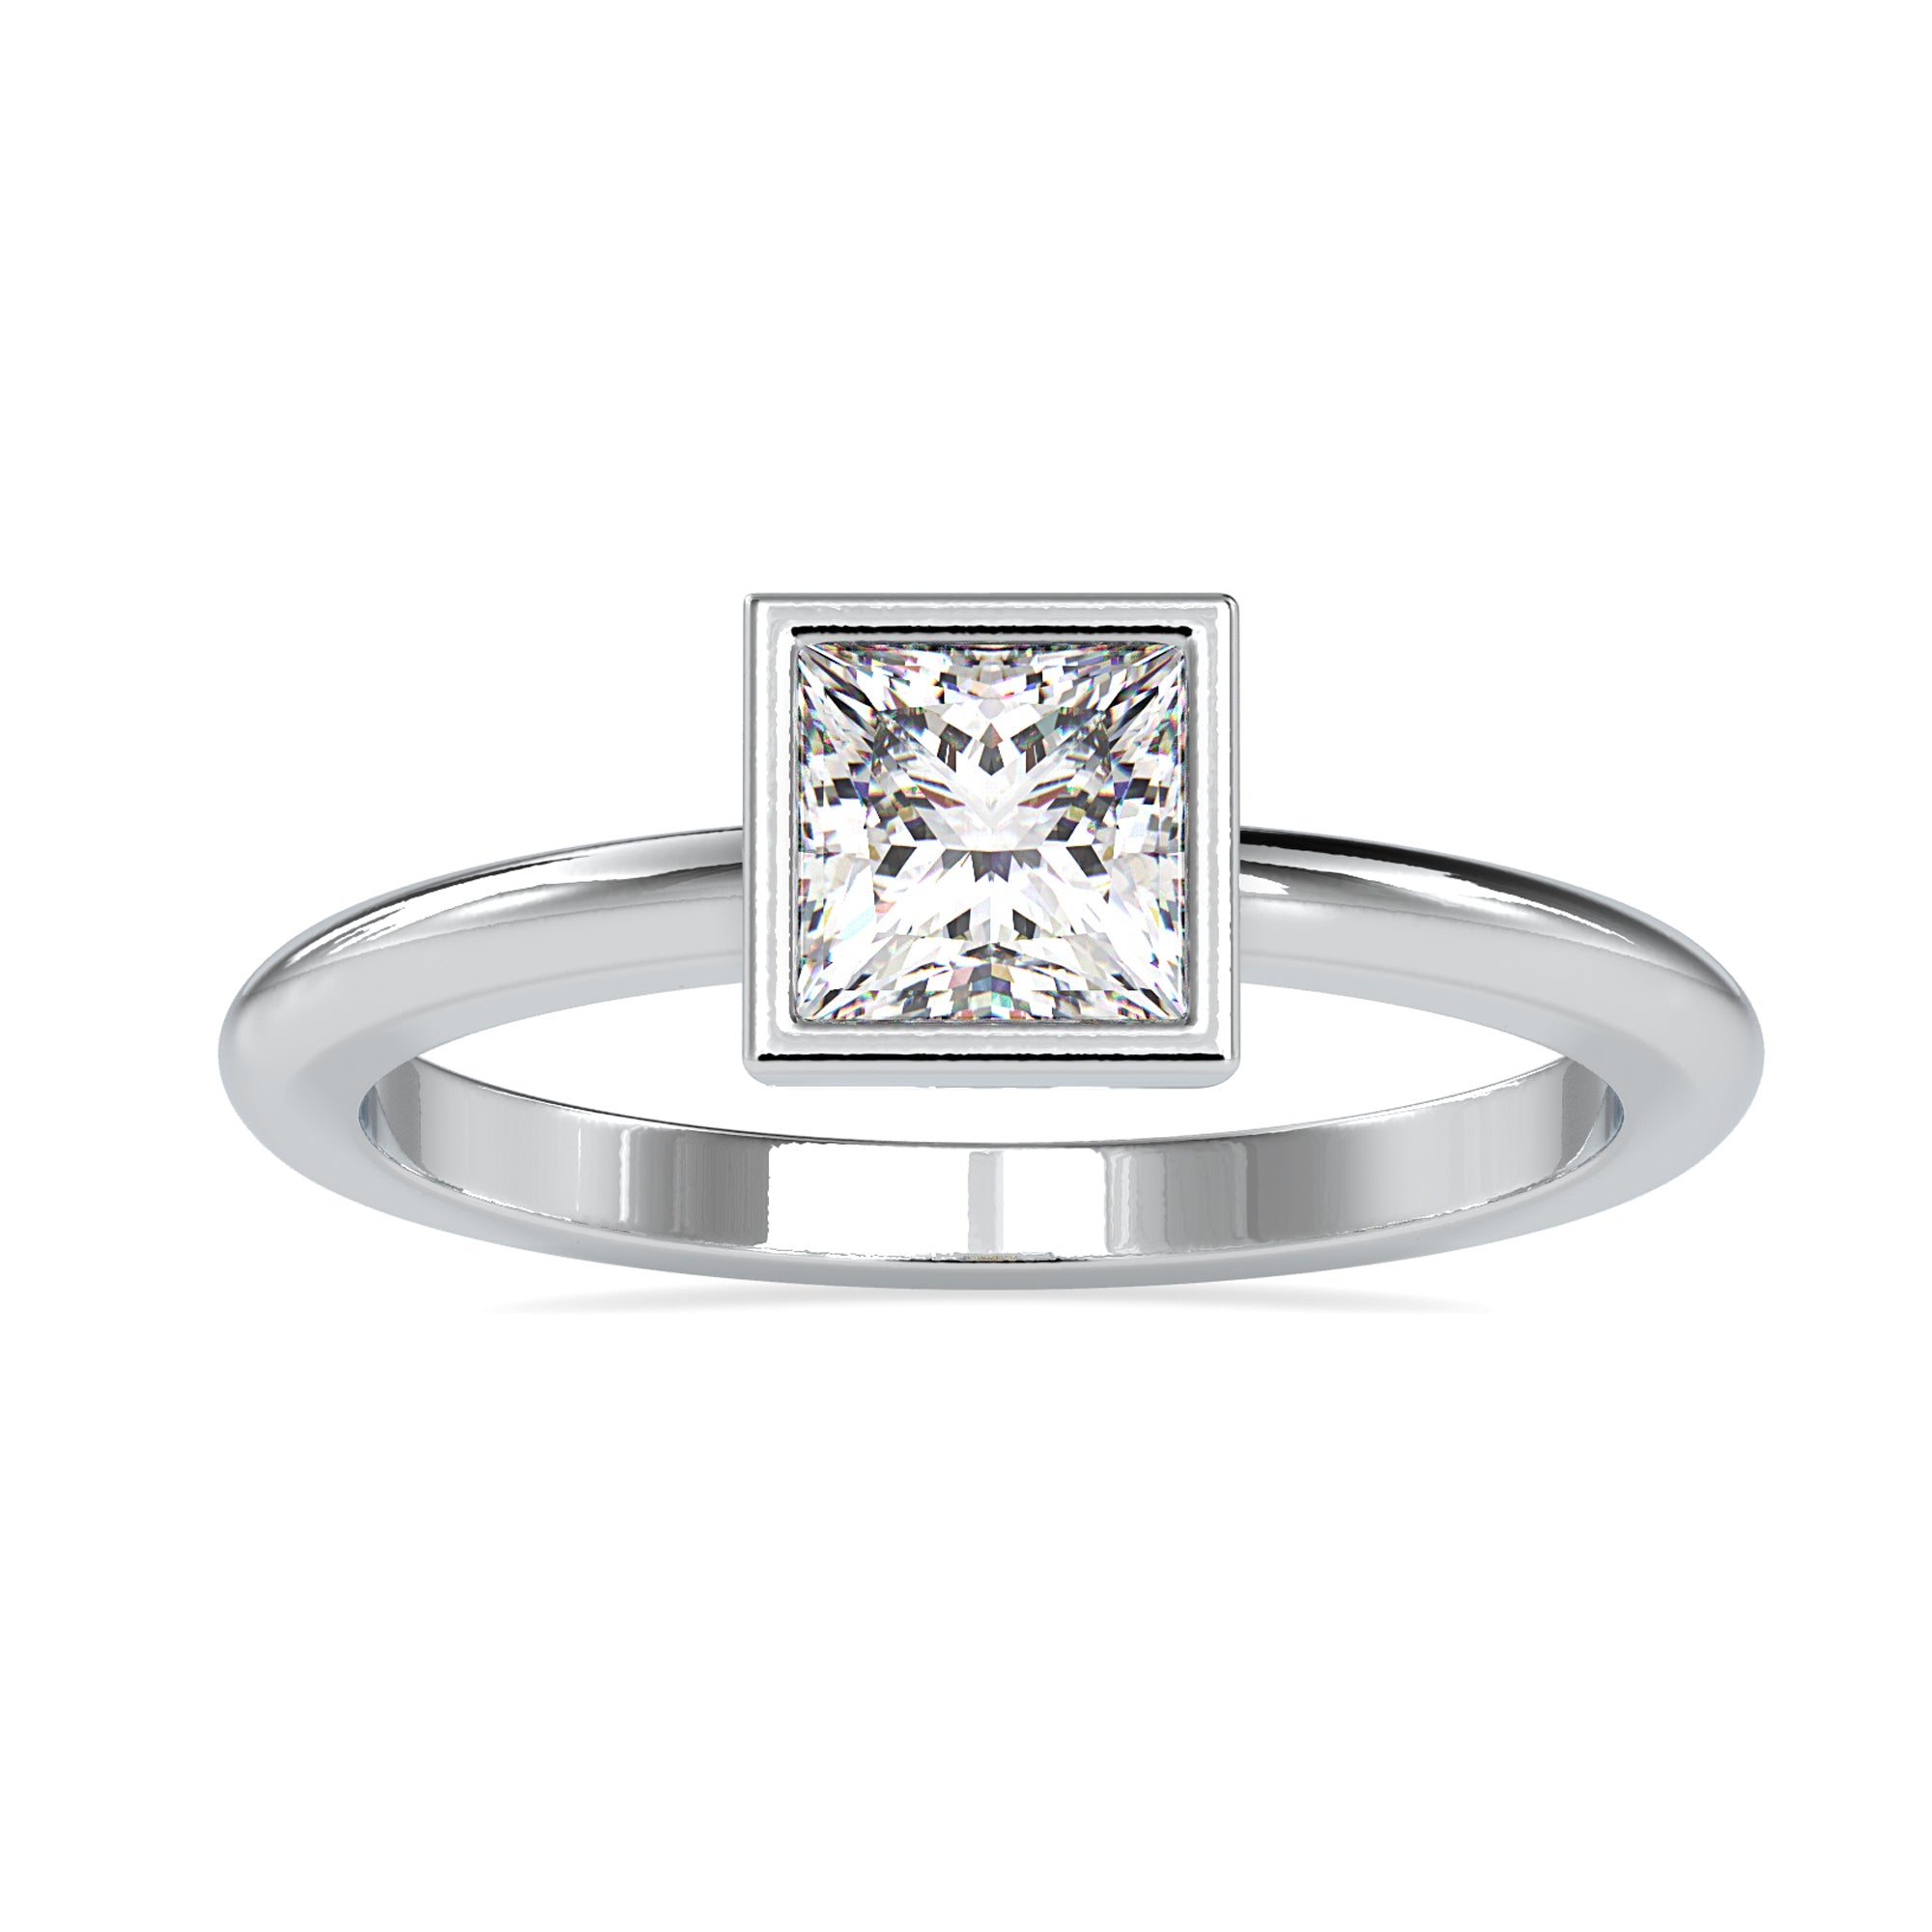 Eye-catching 2.51 CT Princess Cut Colorless Moissanite Solitaire Ring